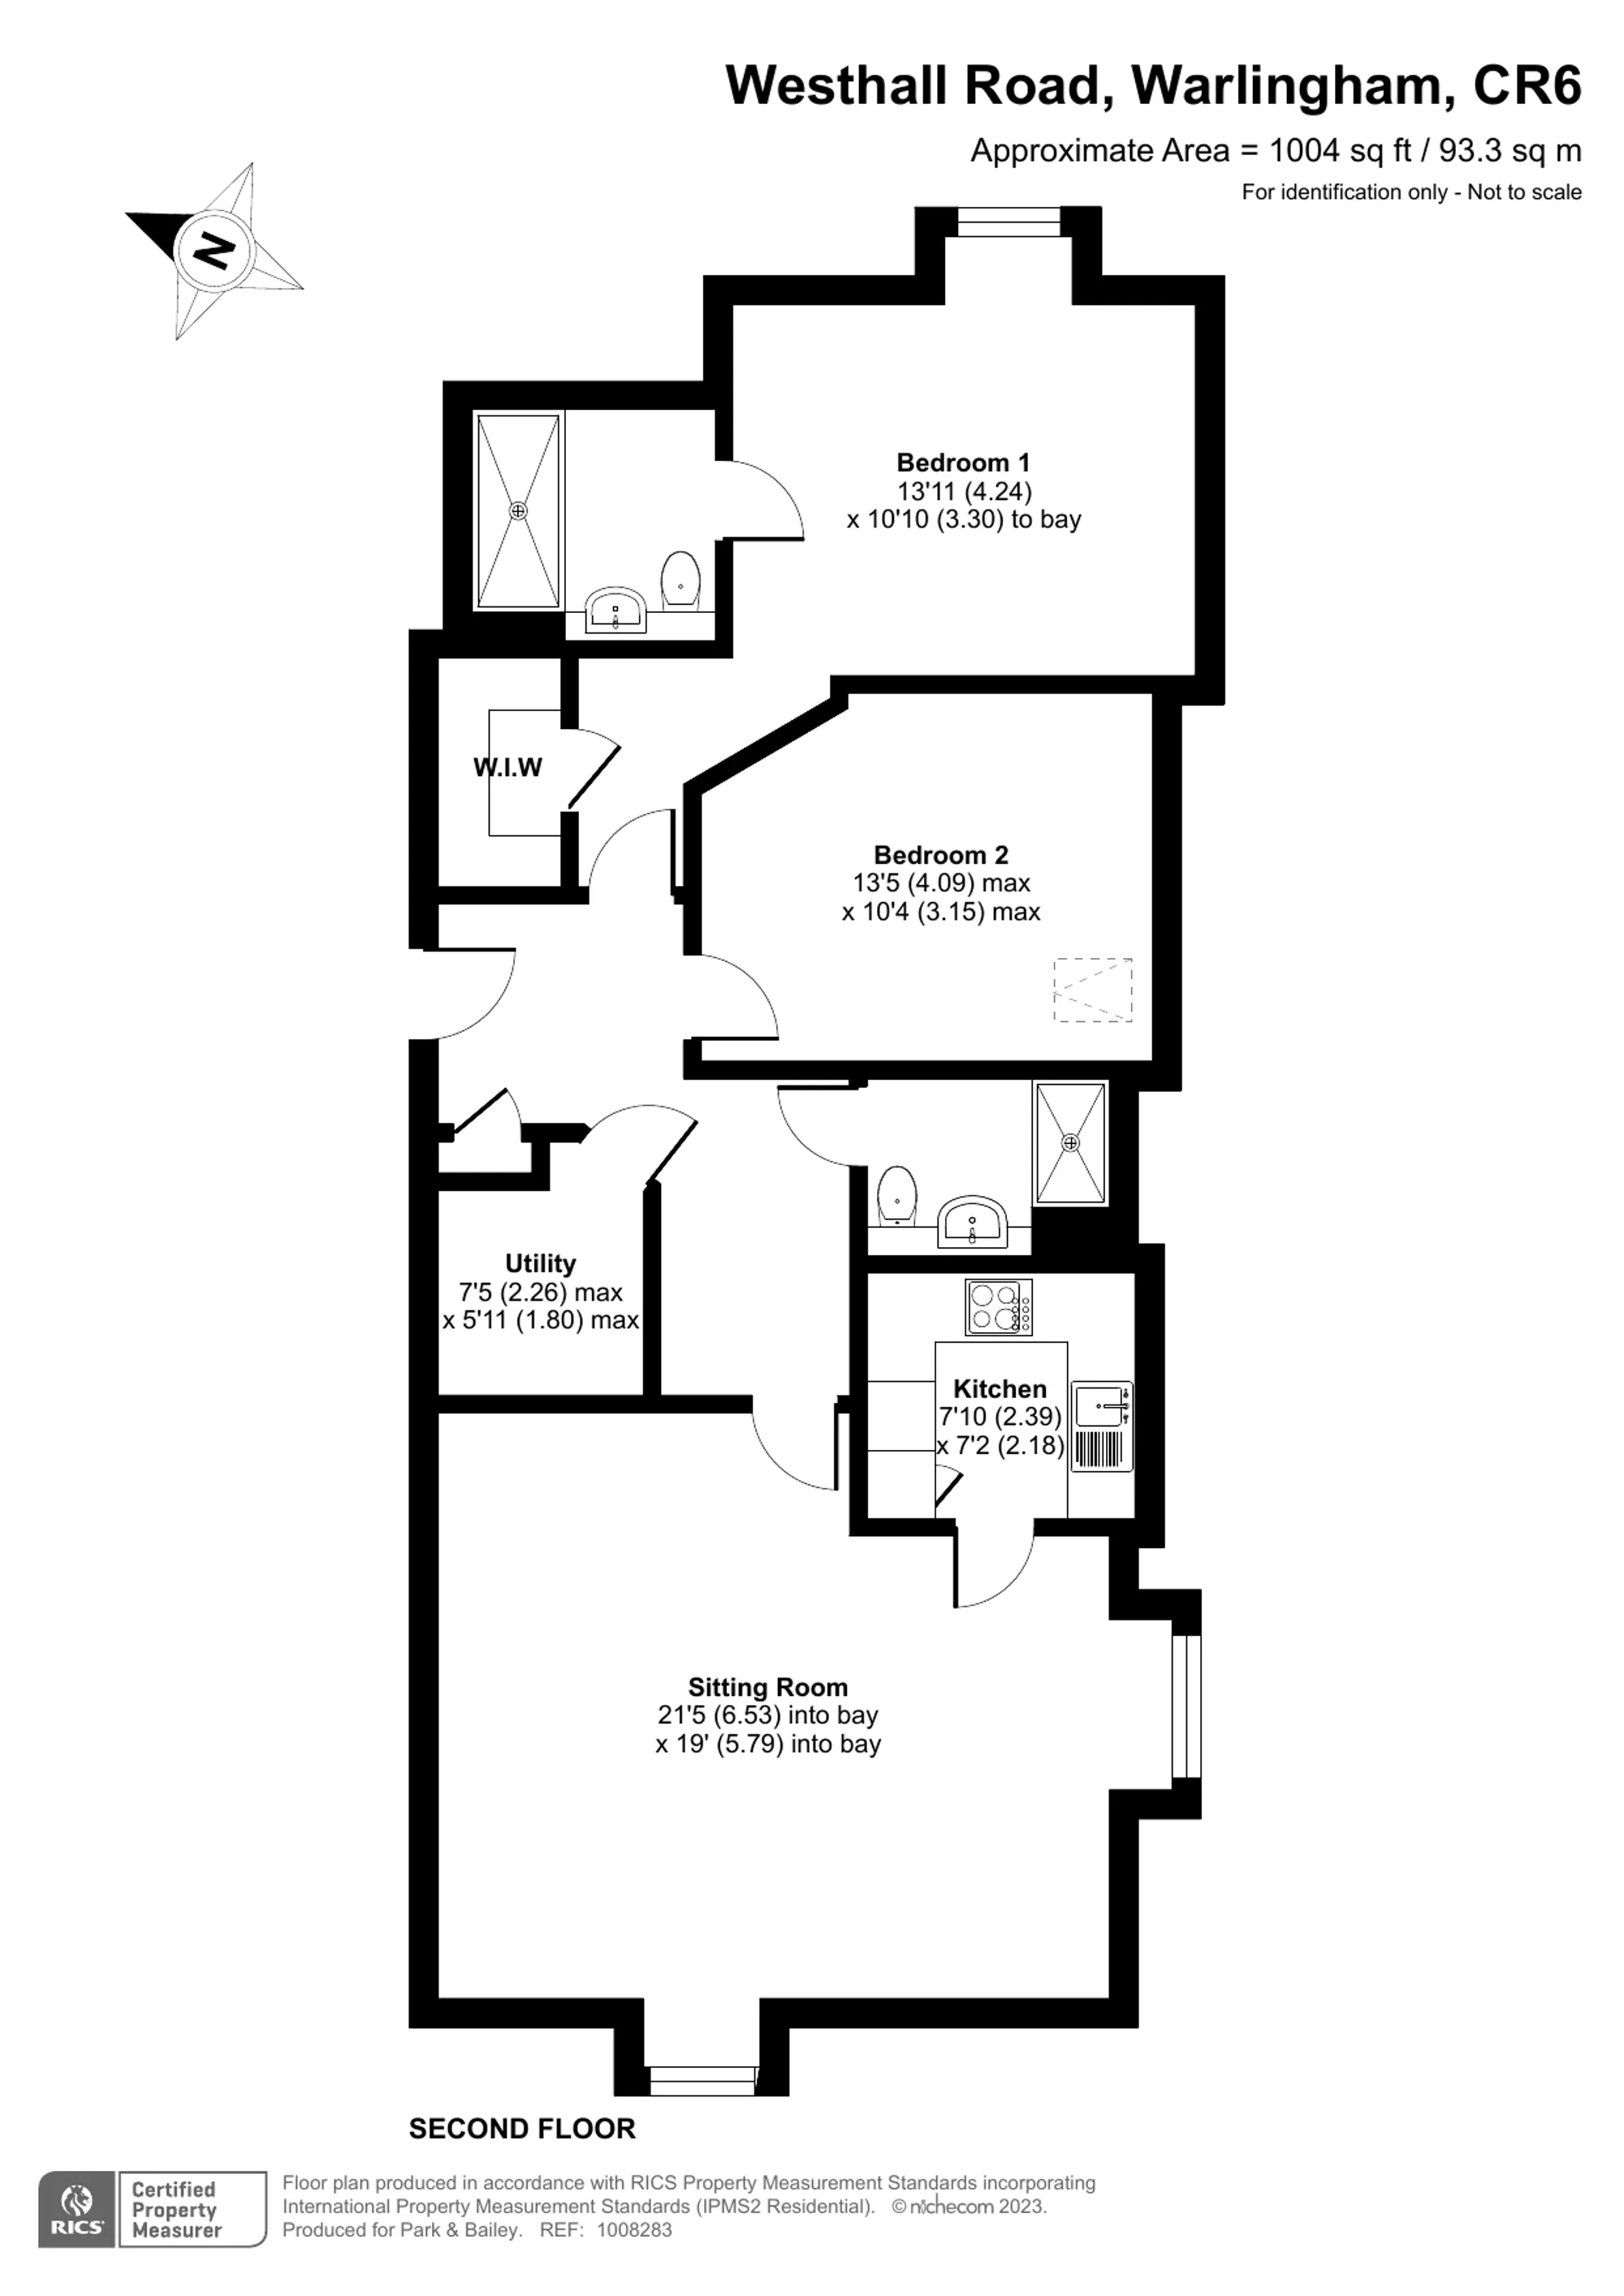 2 bed apartment for sale in Westhall Road, Warlingham - Property floorplan